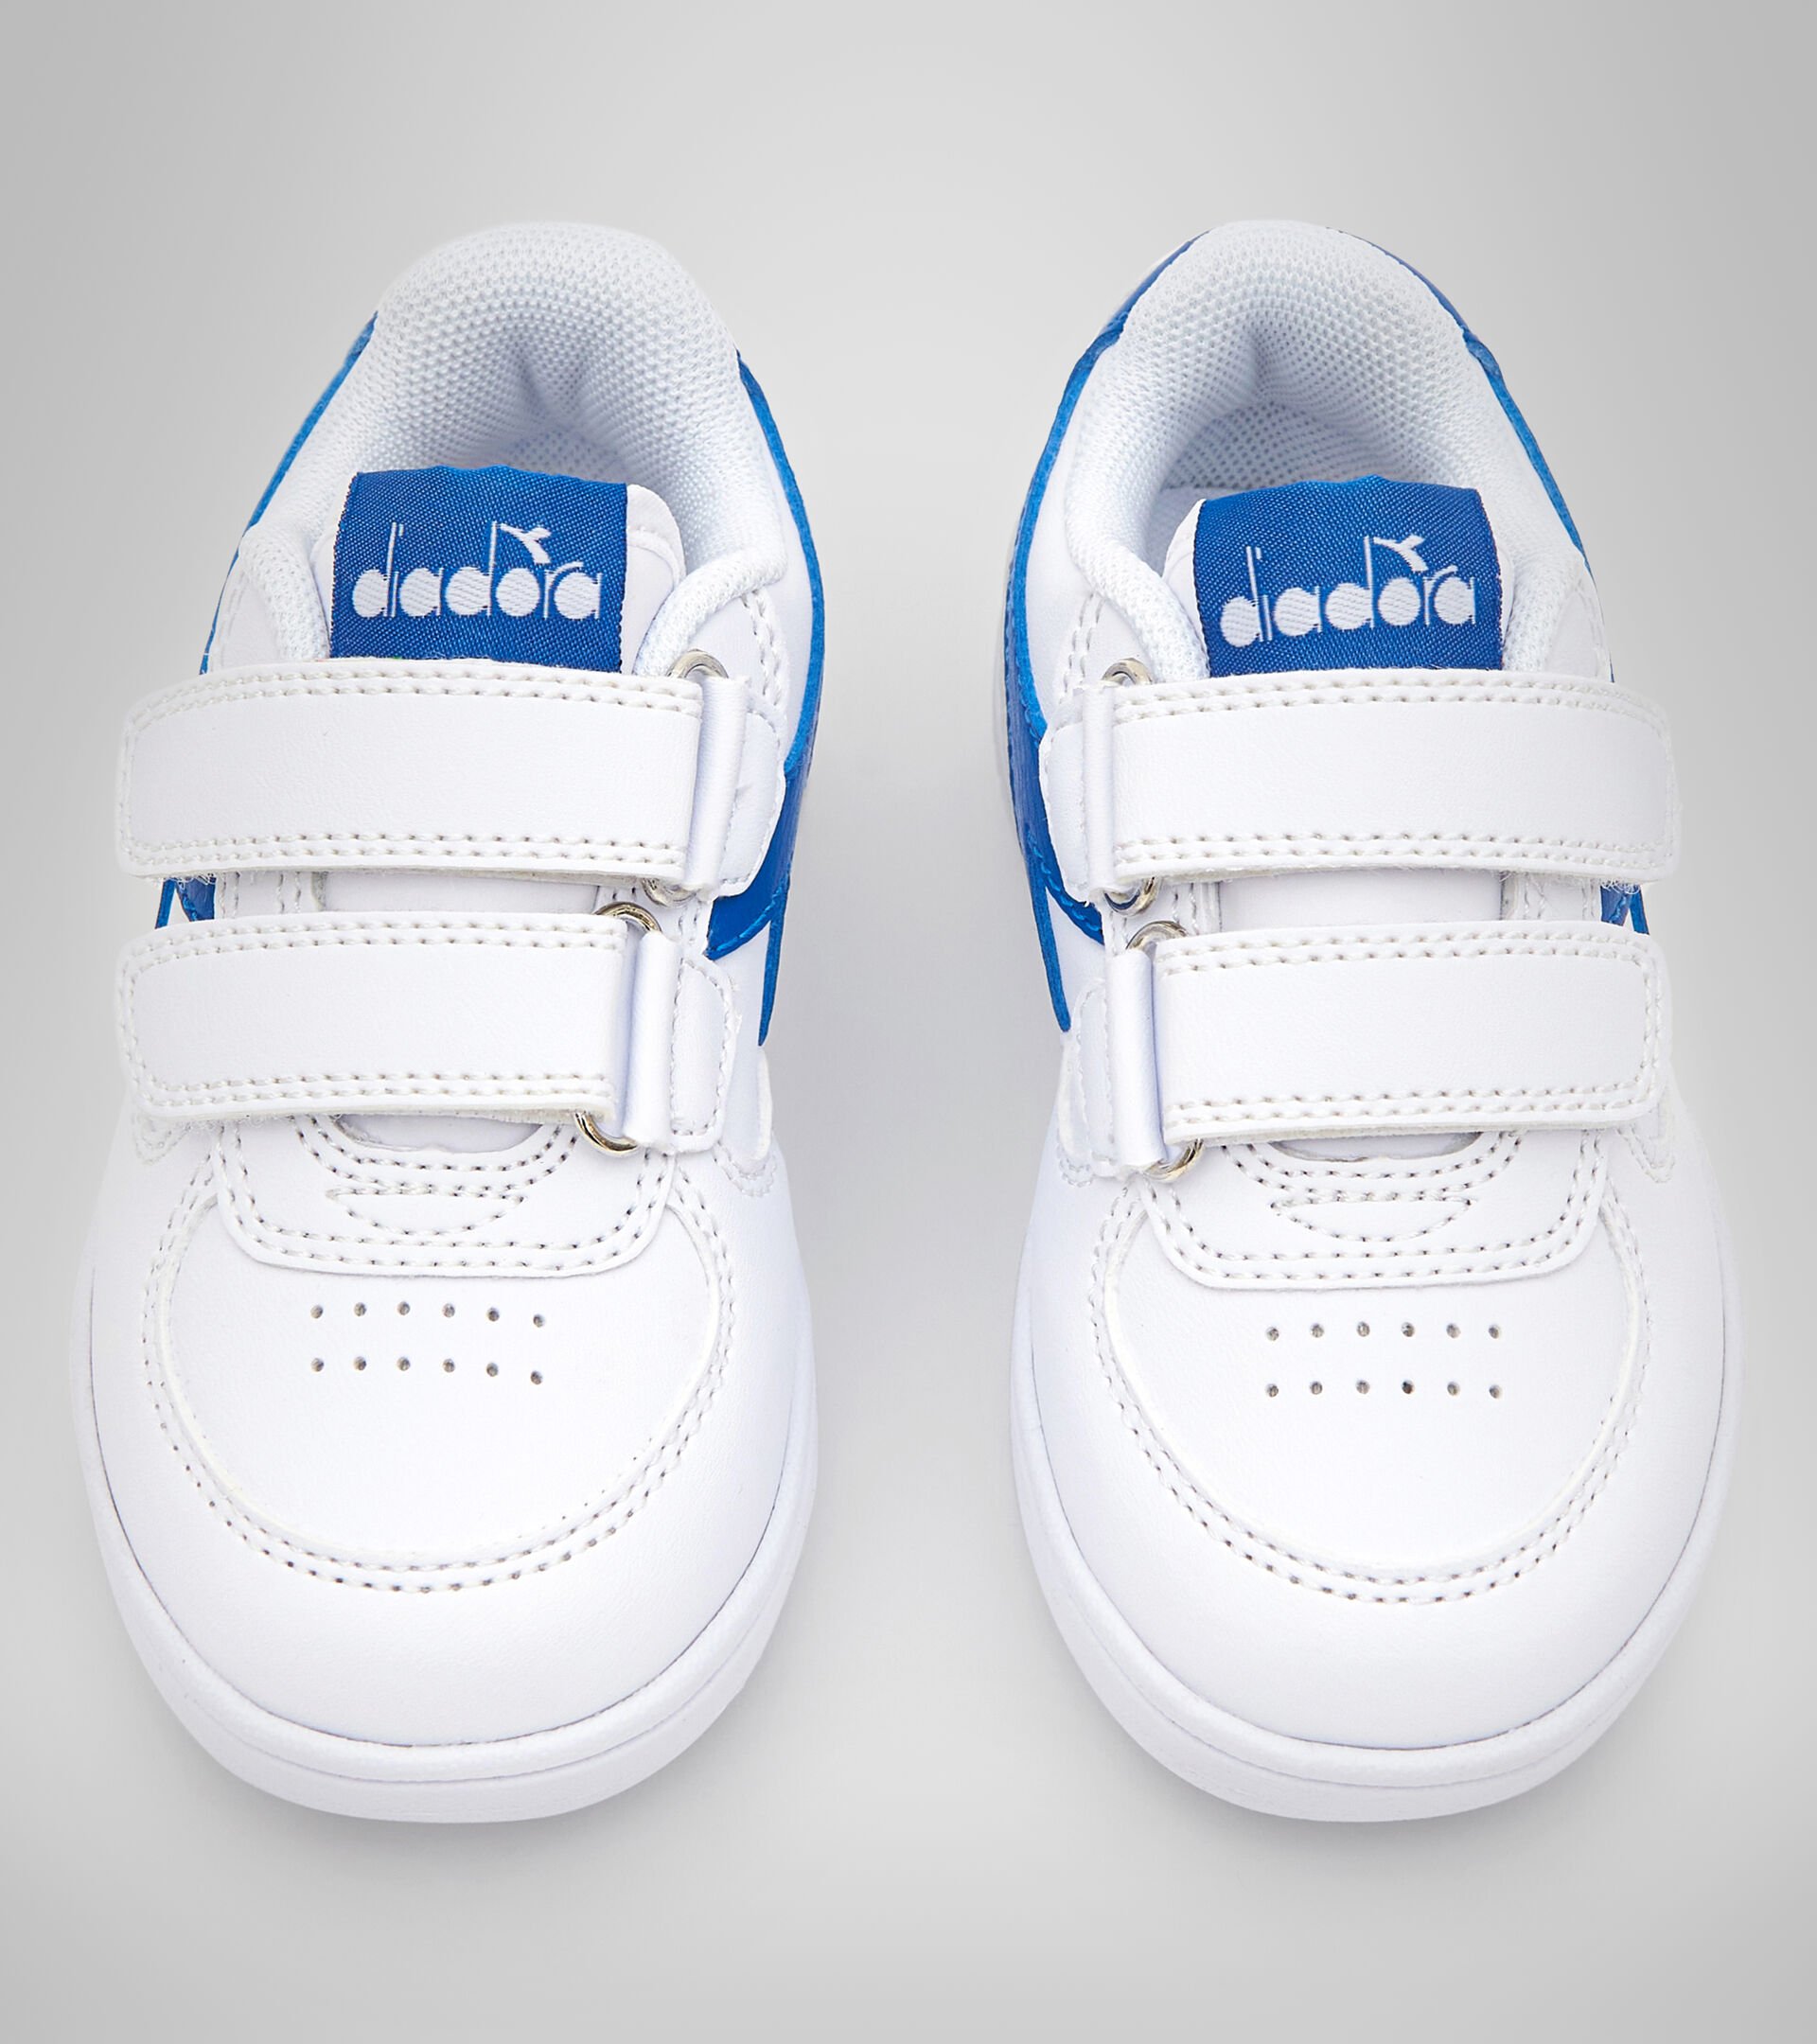 Sports shoes - Toddlers 1-4 years RAPTOR LOW TD WHITE/IMPERIAL BLUE - Diadora